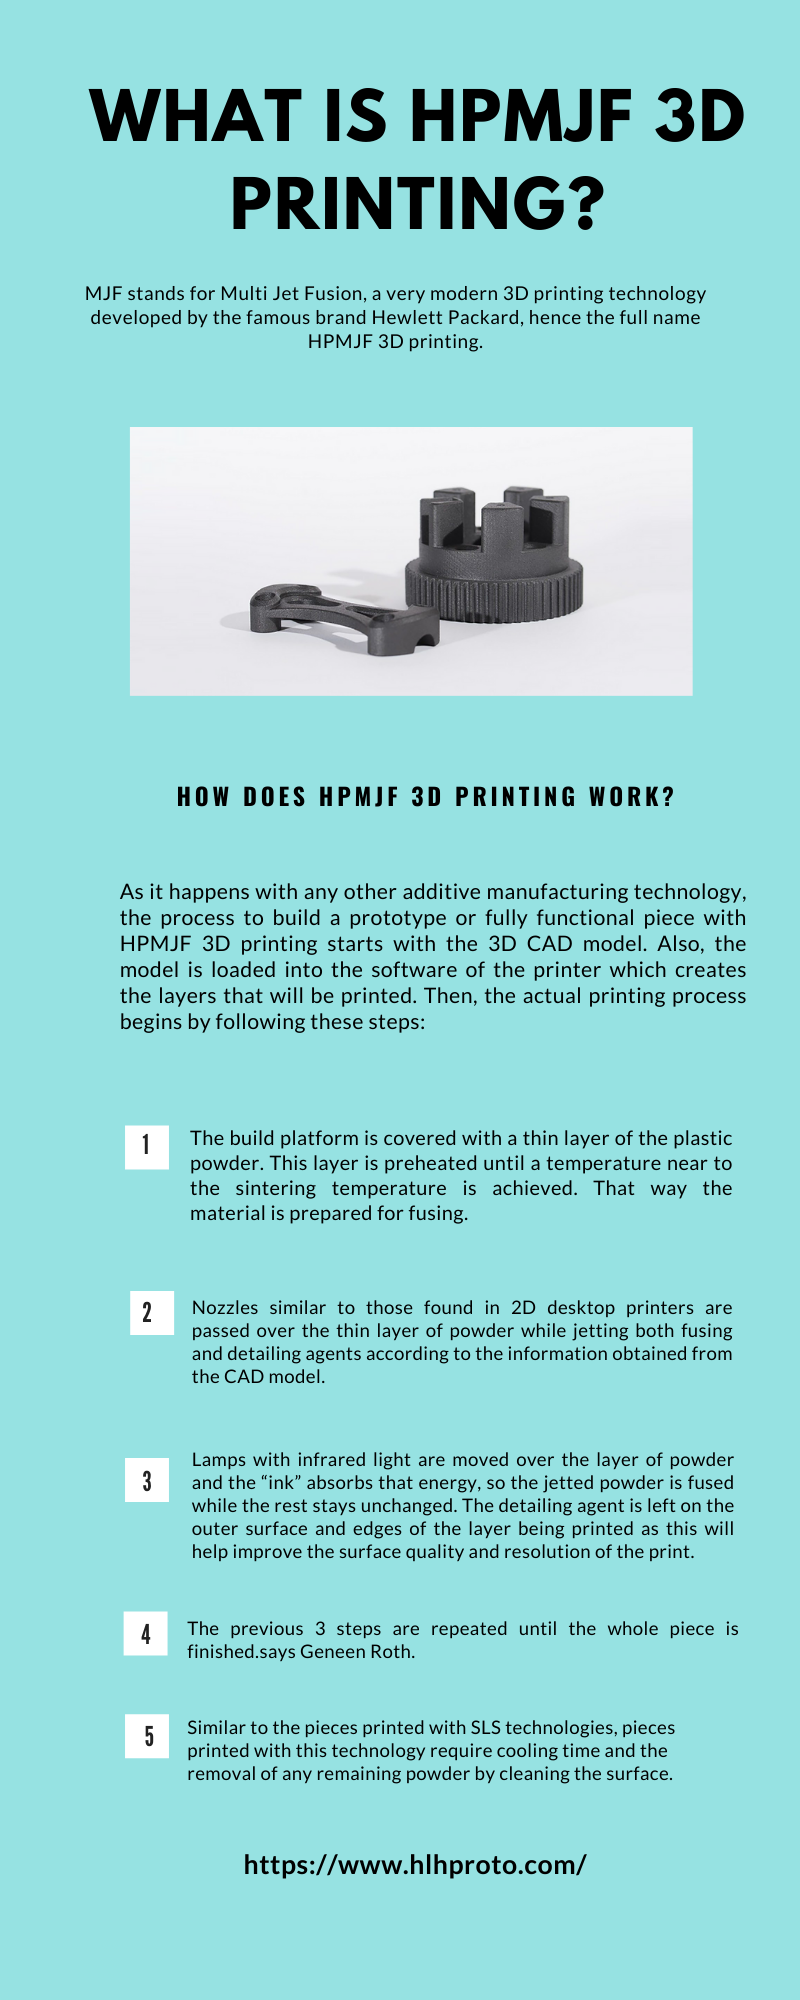 What is HPMJF 3D printing MJF stands for Multi Jet Fusion, a very modern 3D printing technology developed by the famous brand Hewlett Packard, hence the full name HPMJF 3D printing.
https://blog.hlhproto.com/2021/09/10/what-is-hpmjf-3d-printing/ by HLH PROTO LTD